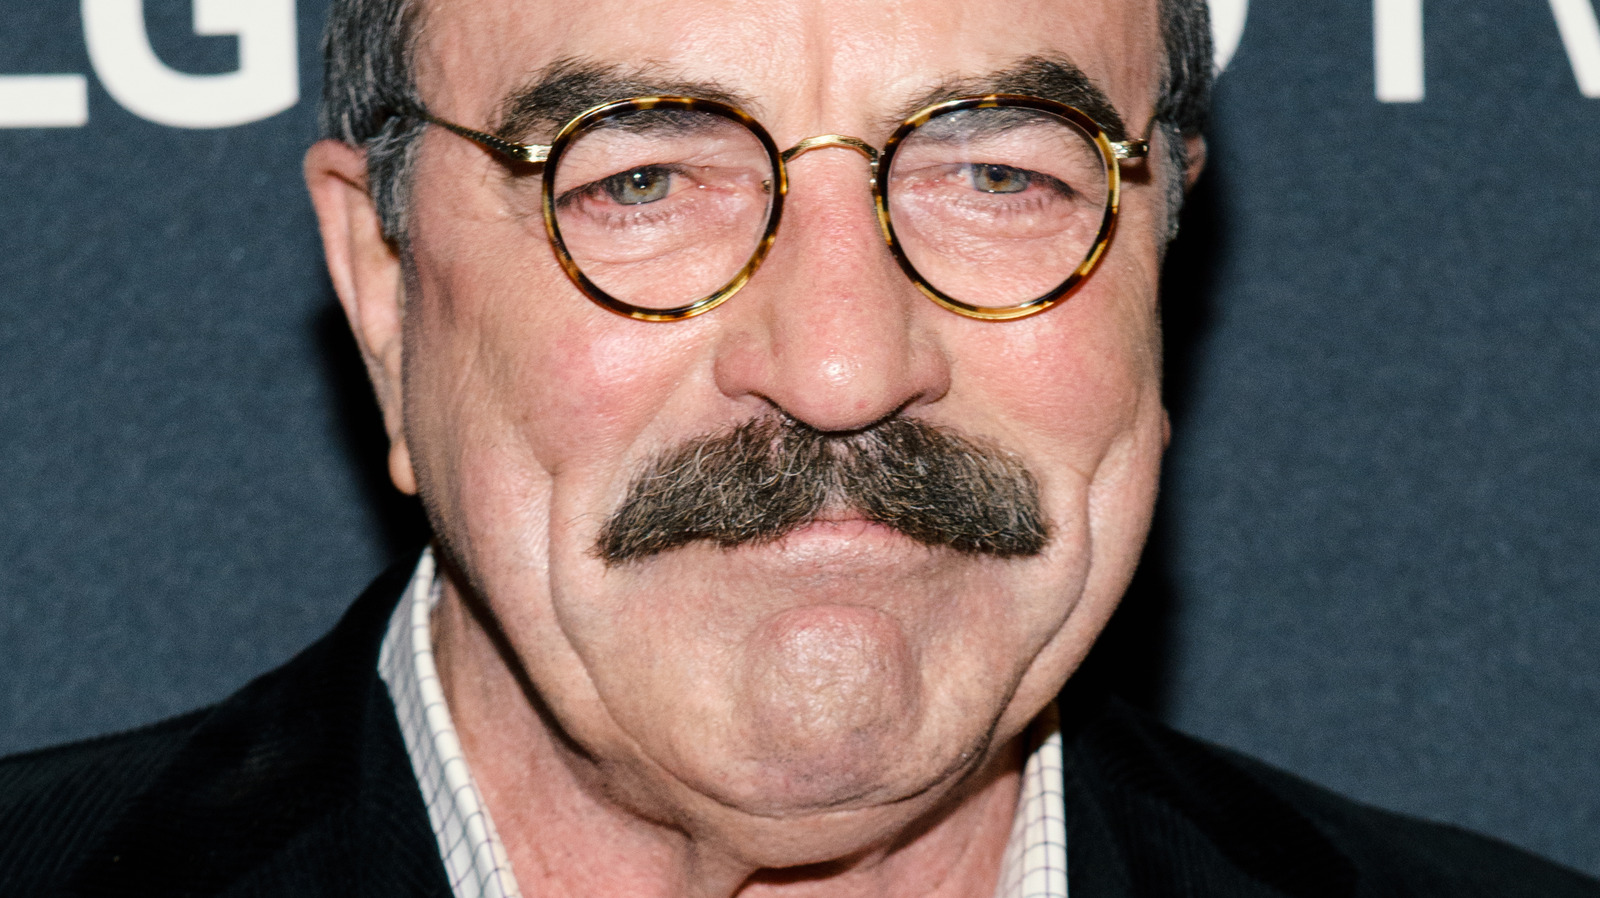 The Grease Star You Likely Didn't Realize Appeared In Blue Bloods